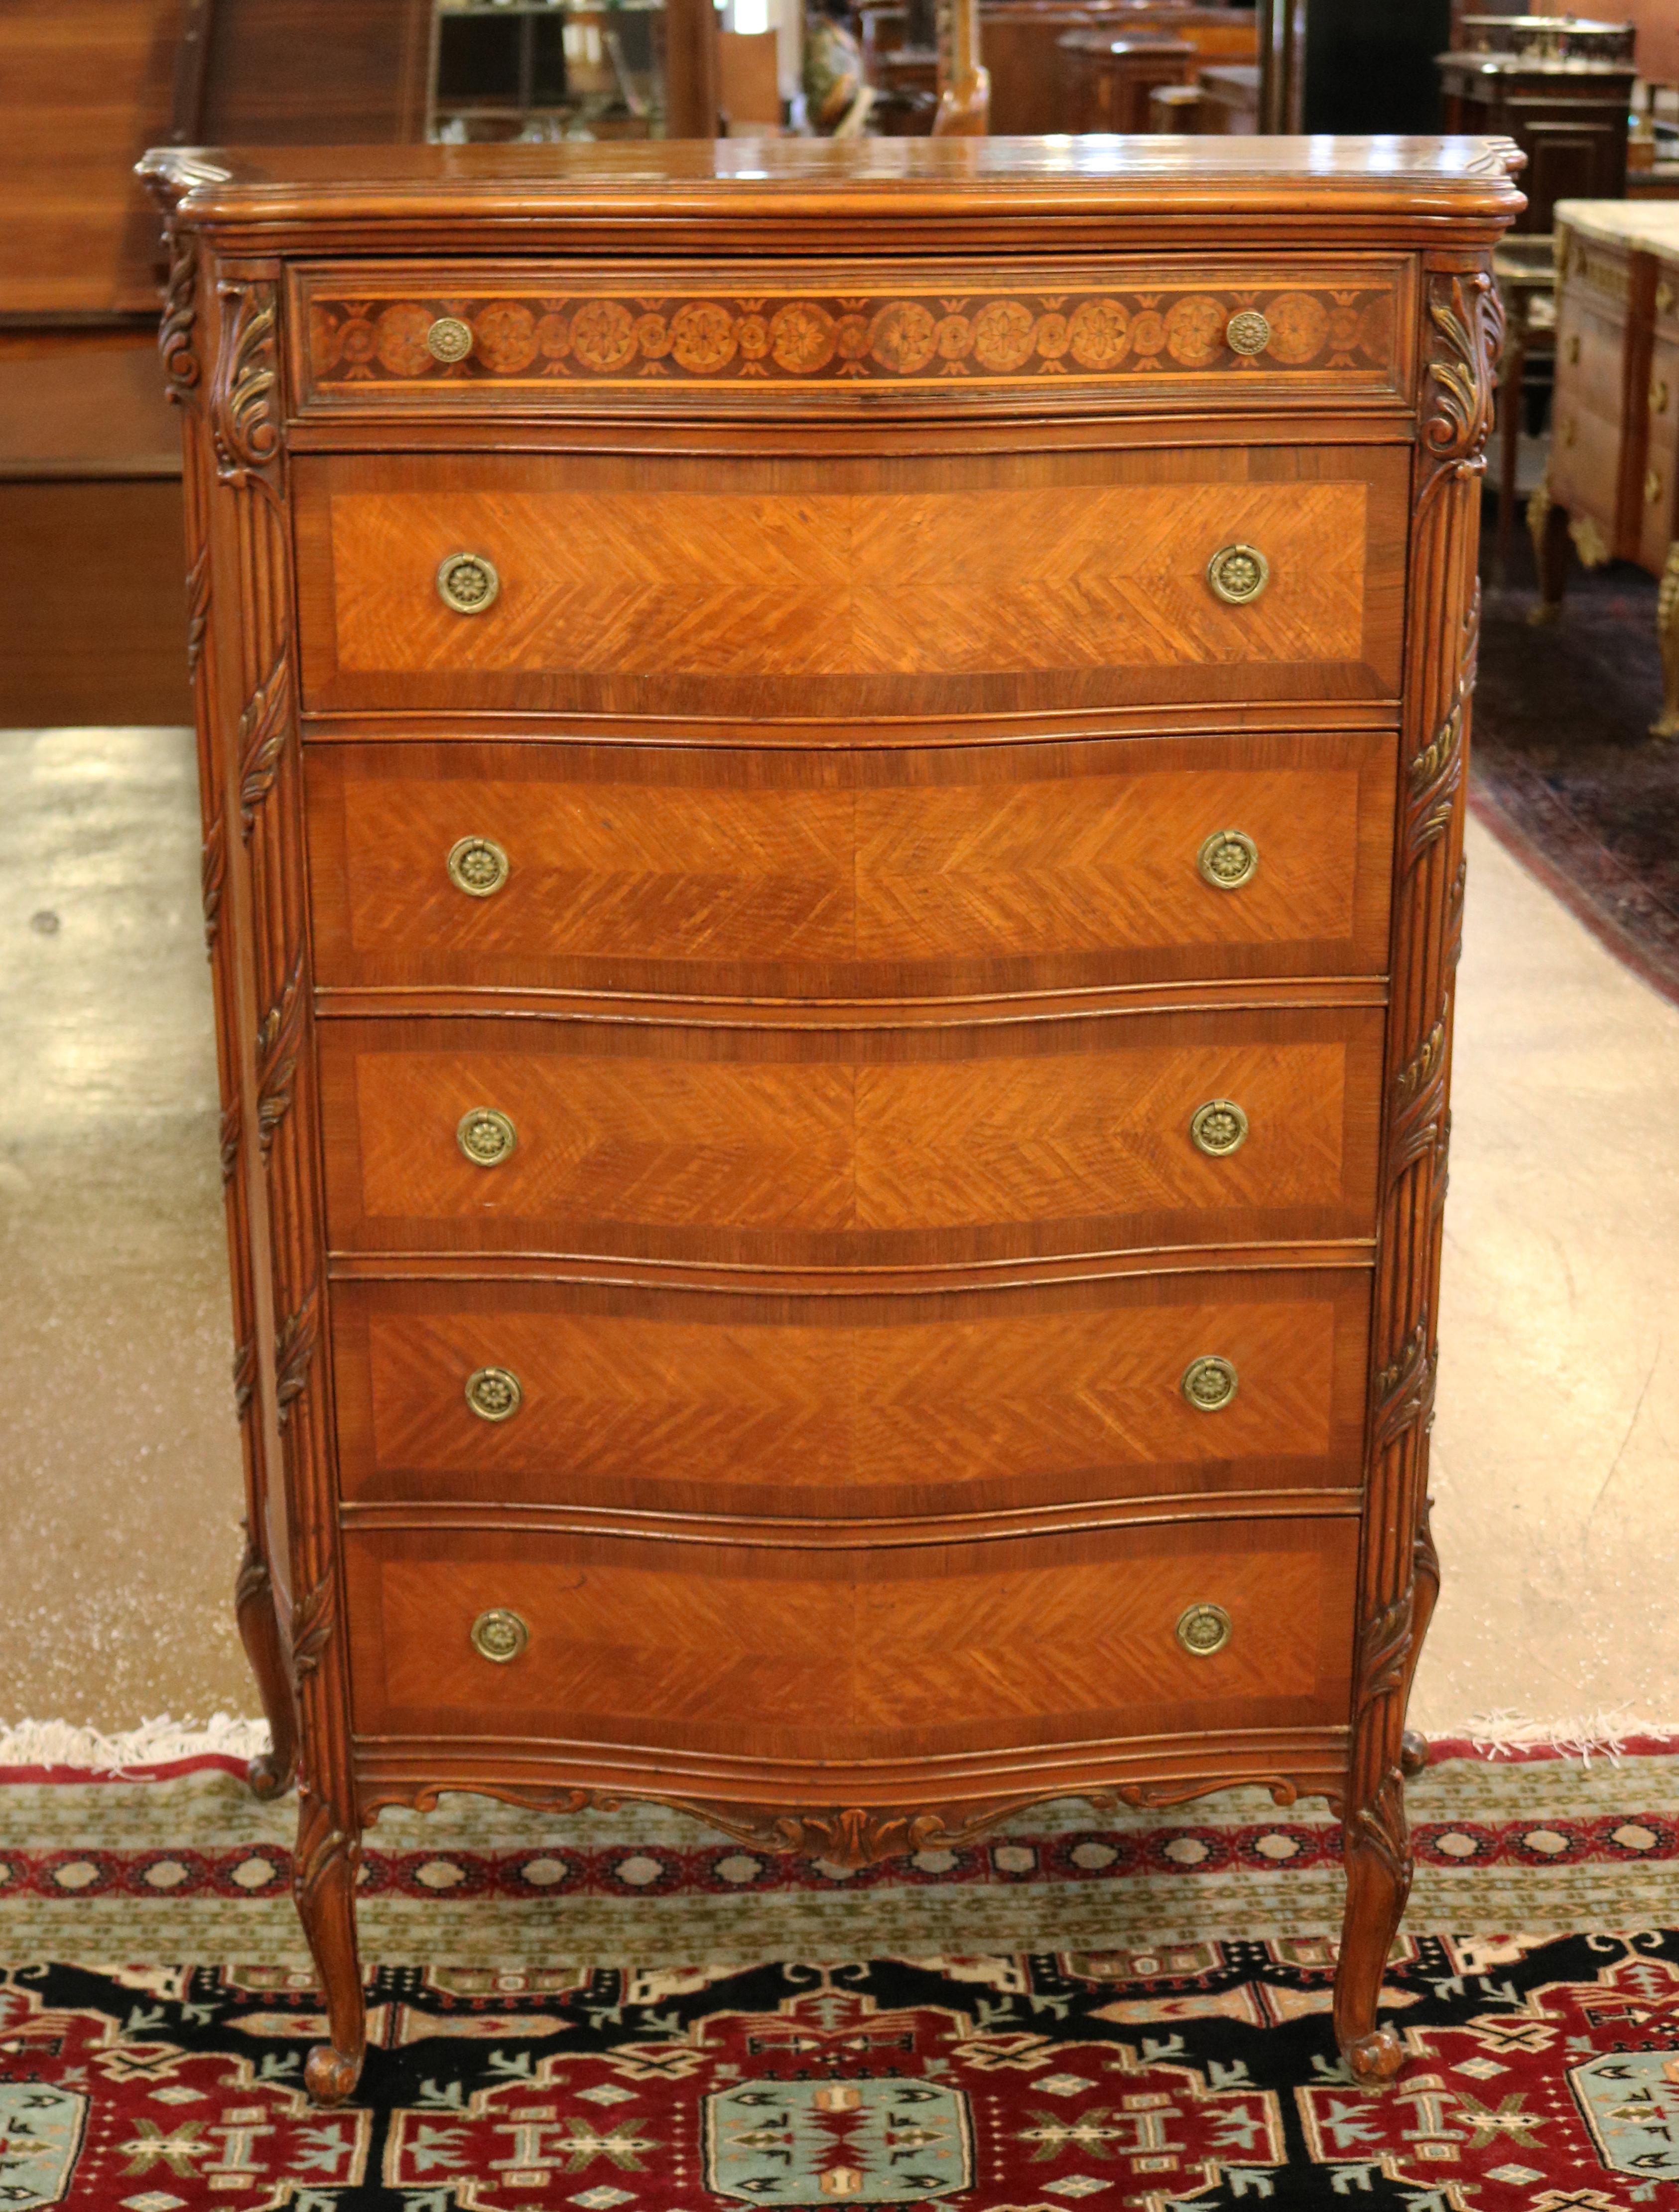 ​Fabulous French Louis XV Style Inlaid Kingwood High Chest of Drawers Dresser

Dimensions : 55